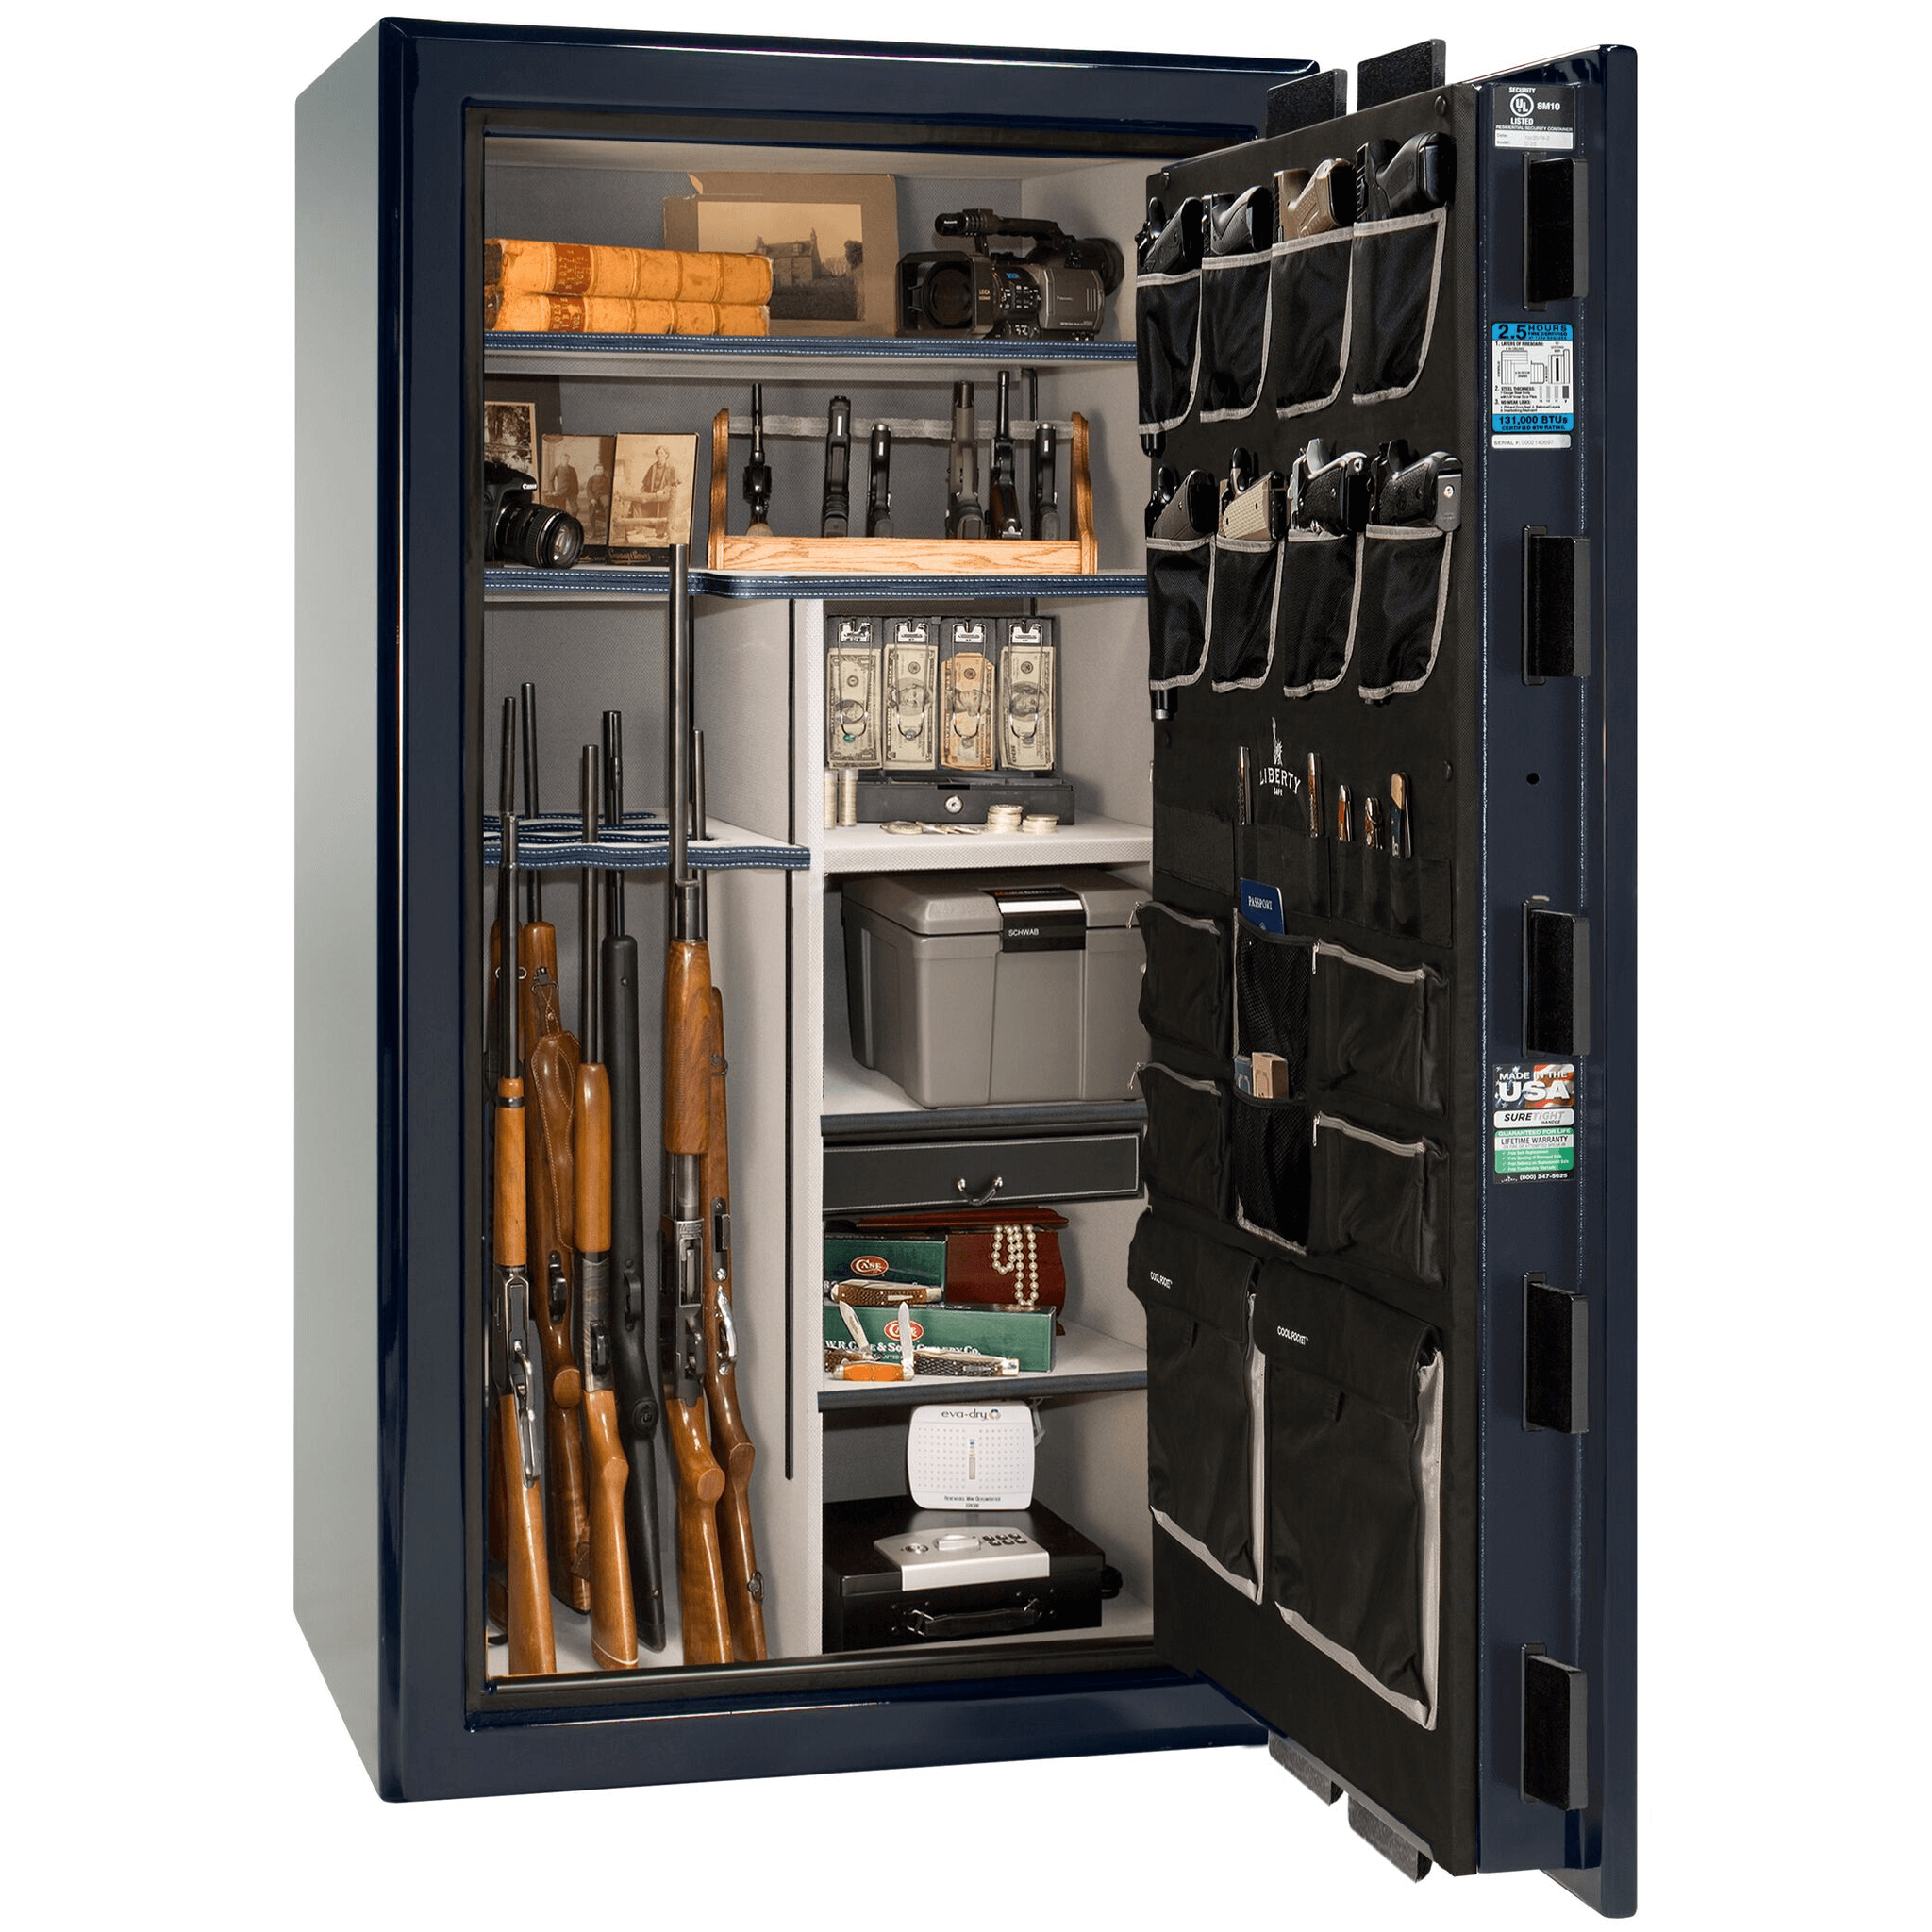 Presidential Series | Level 8 Security | 2.5 Hours Fire Protection | 40 | Dimensions: 66.5"(H) x 36.25"(W) x 32"(D) | Blue Gloss | Chrome Hardware | Mechanical Lock